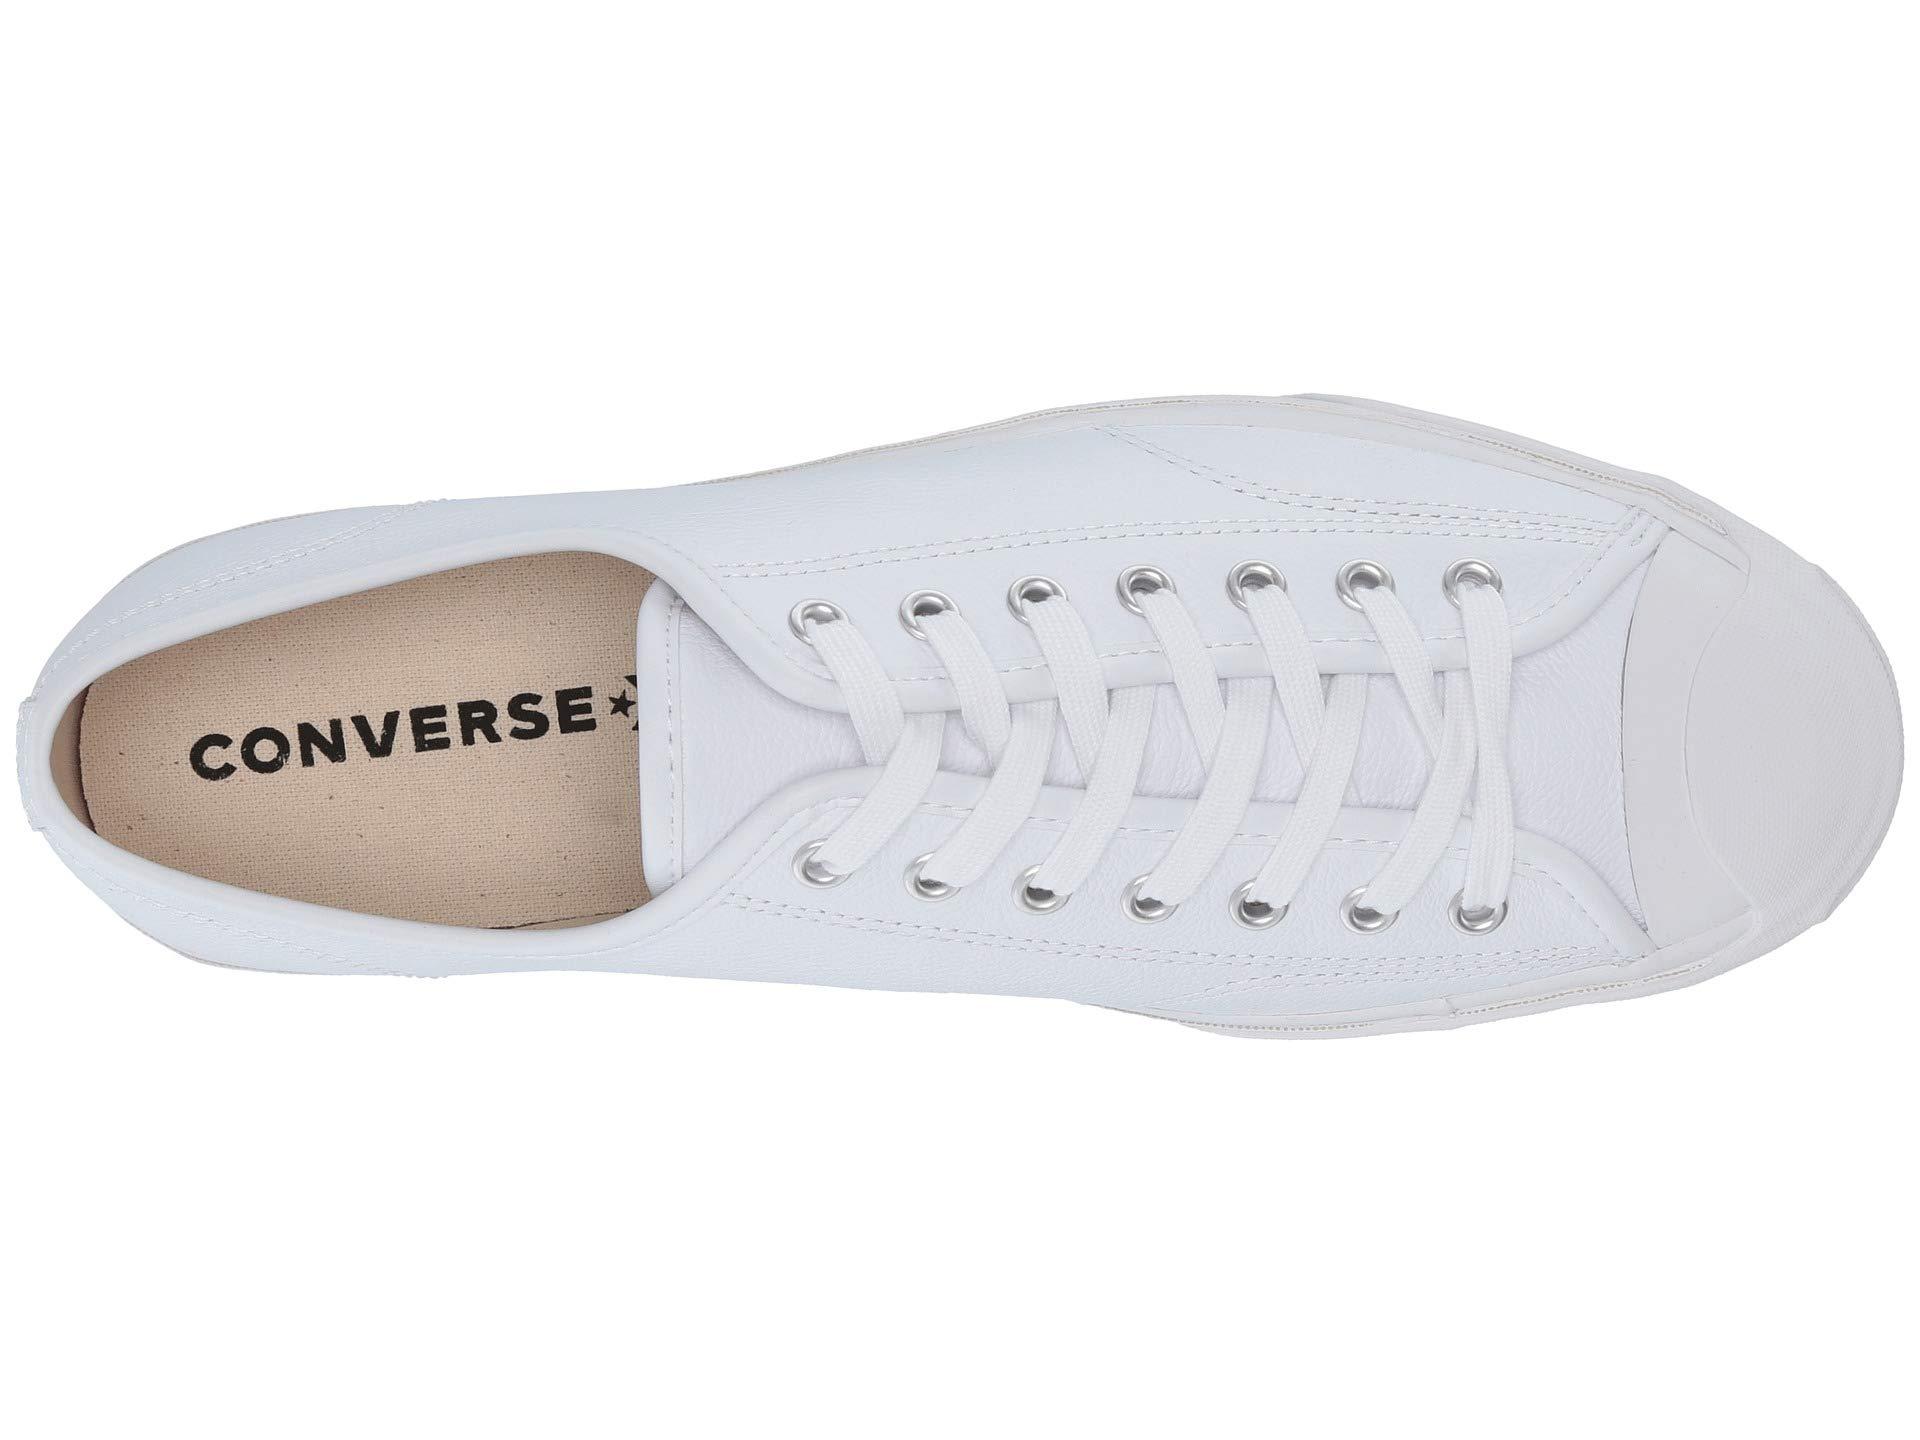 converse white gold leather